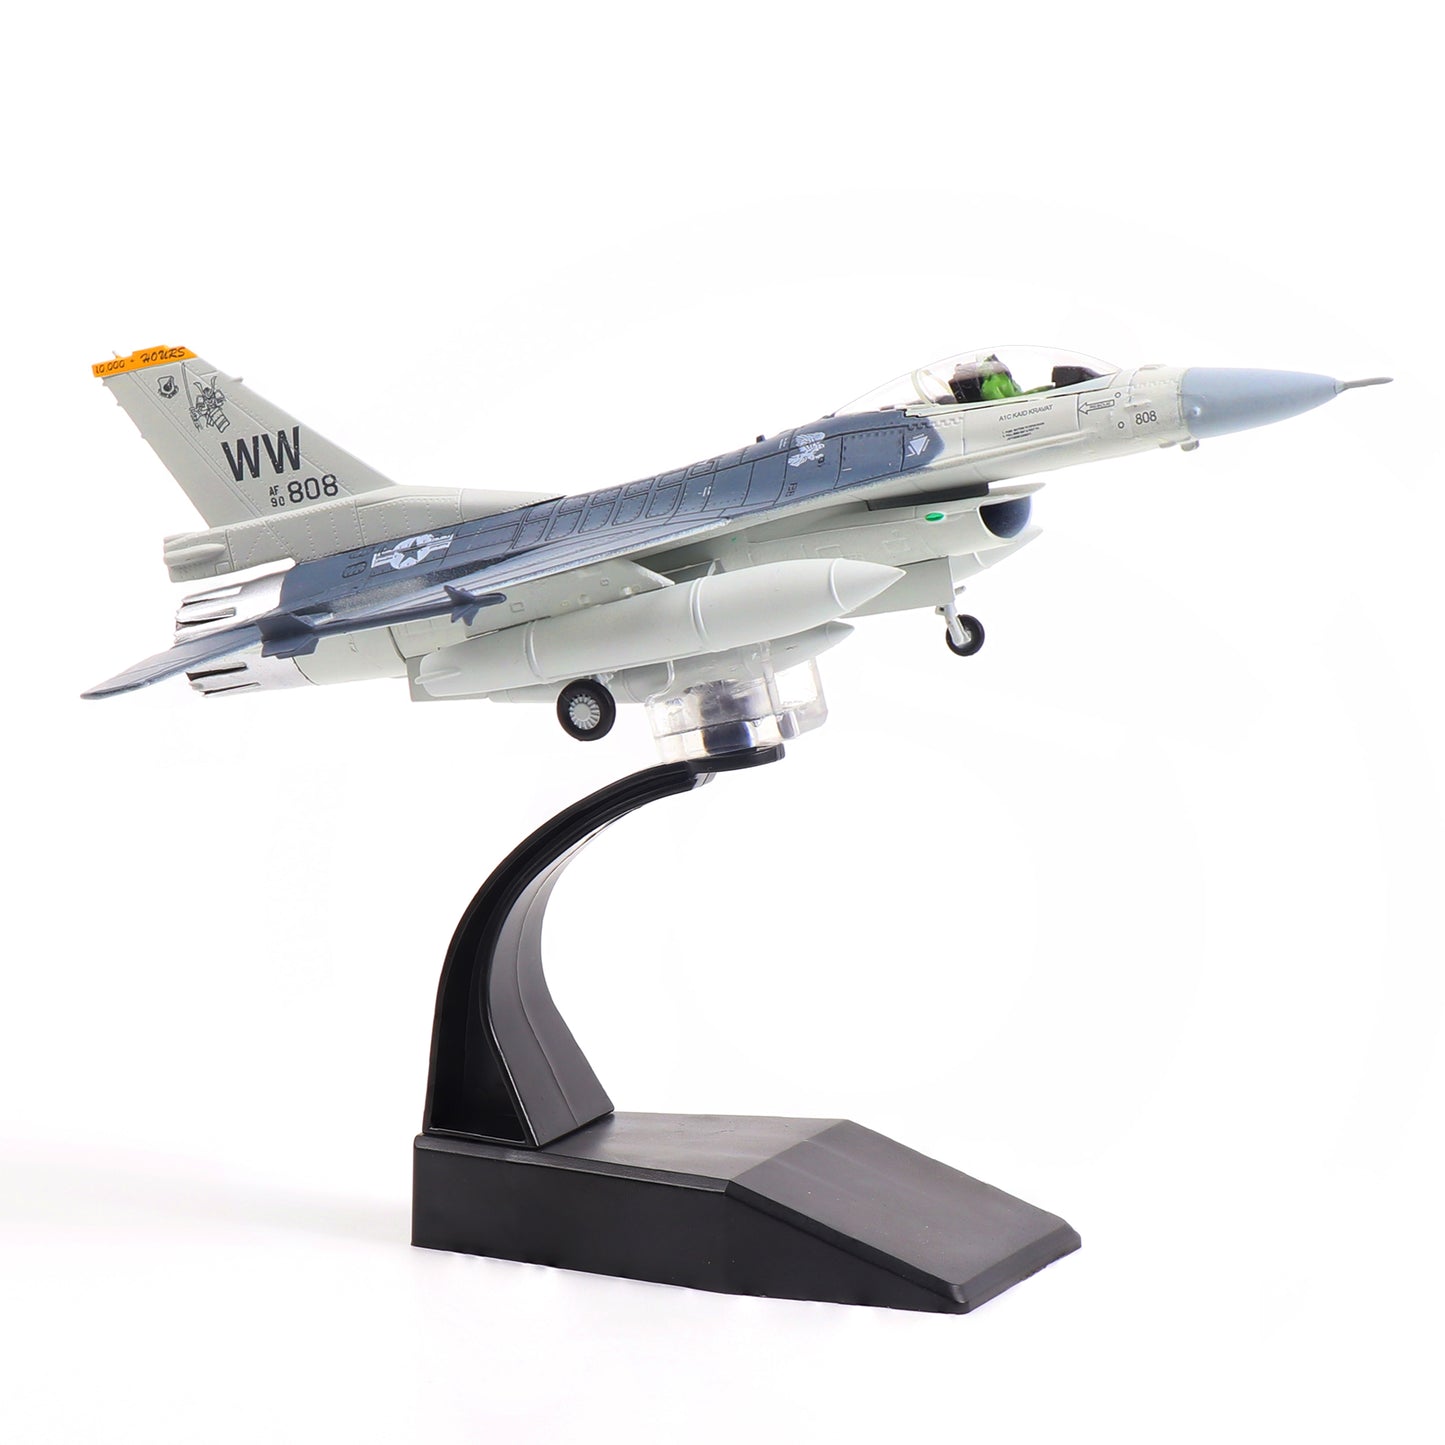 NUOTIE 1/100 F-16C Fighting Falcon Fighter Model Metal DieCast Aircraft Jet Kit Fighter Plane Model Military Airplane for Collection and Gift(Misawa AFB 35th)